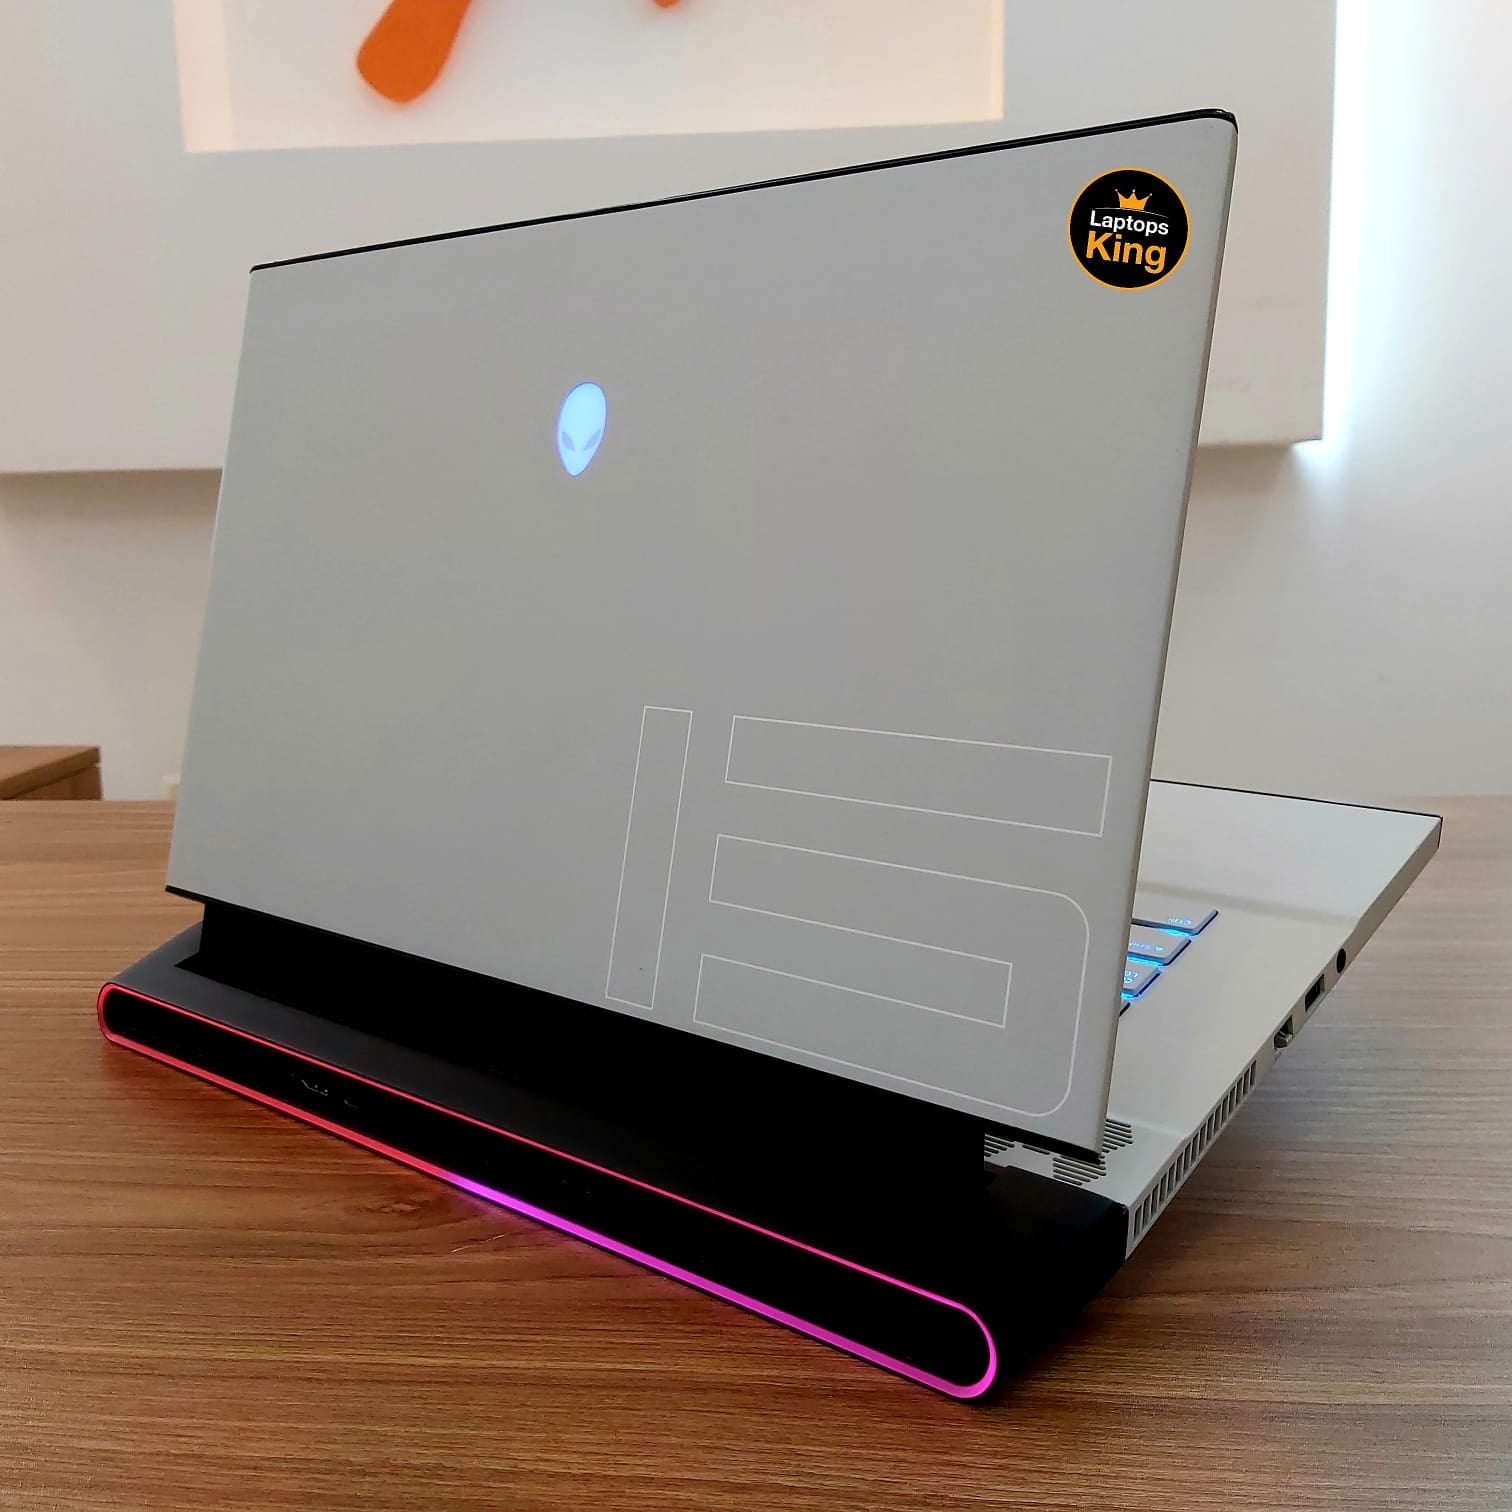 Alienware M15 i7 RTX 2080 Gaming Laptops (New Open Box) Gaming laptop, Graphic Design laptop, best laptop for gaming, Best laptop for graphic design, computer for sale Lebanon, laptop for video editing in Lebanon, laptop for sale Lebanon, Best graphic design laptop,	Best video editing laptop, Best programming laptop, laptop for sale in Lebanon, laptops for sale in Lebanon, laptop for sale in Lebanon, buy computer Lebanon, buy laptop Lebanon.